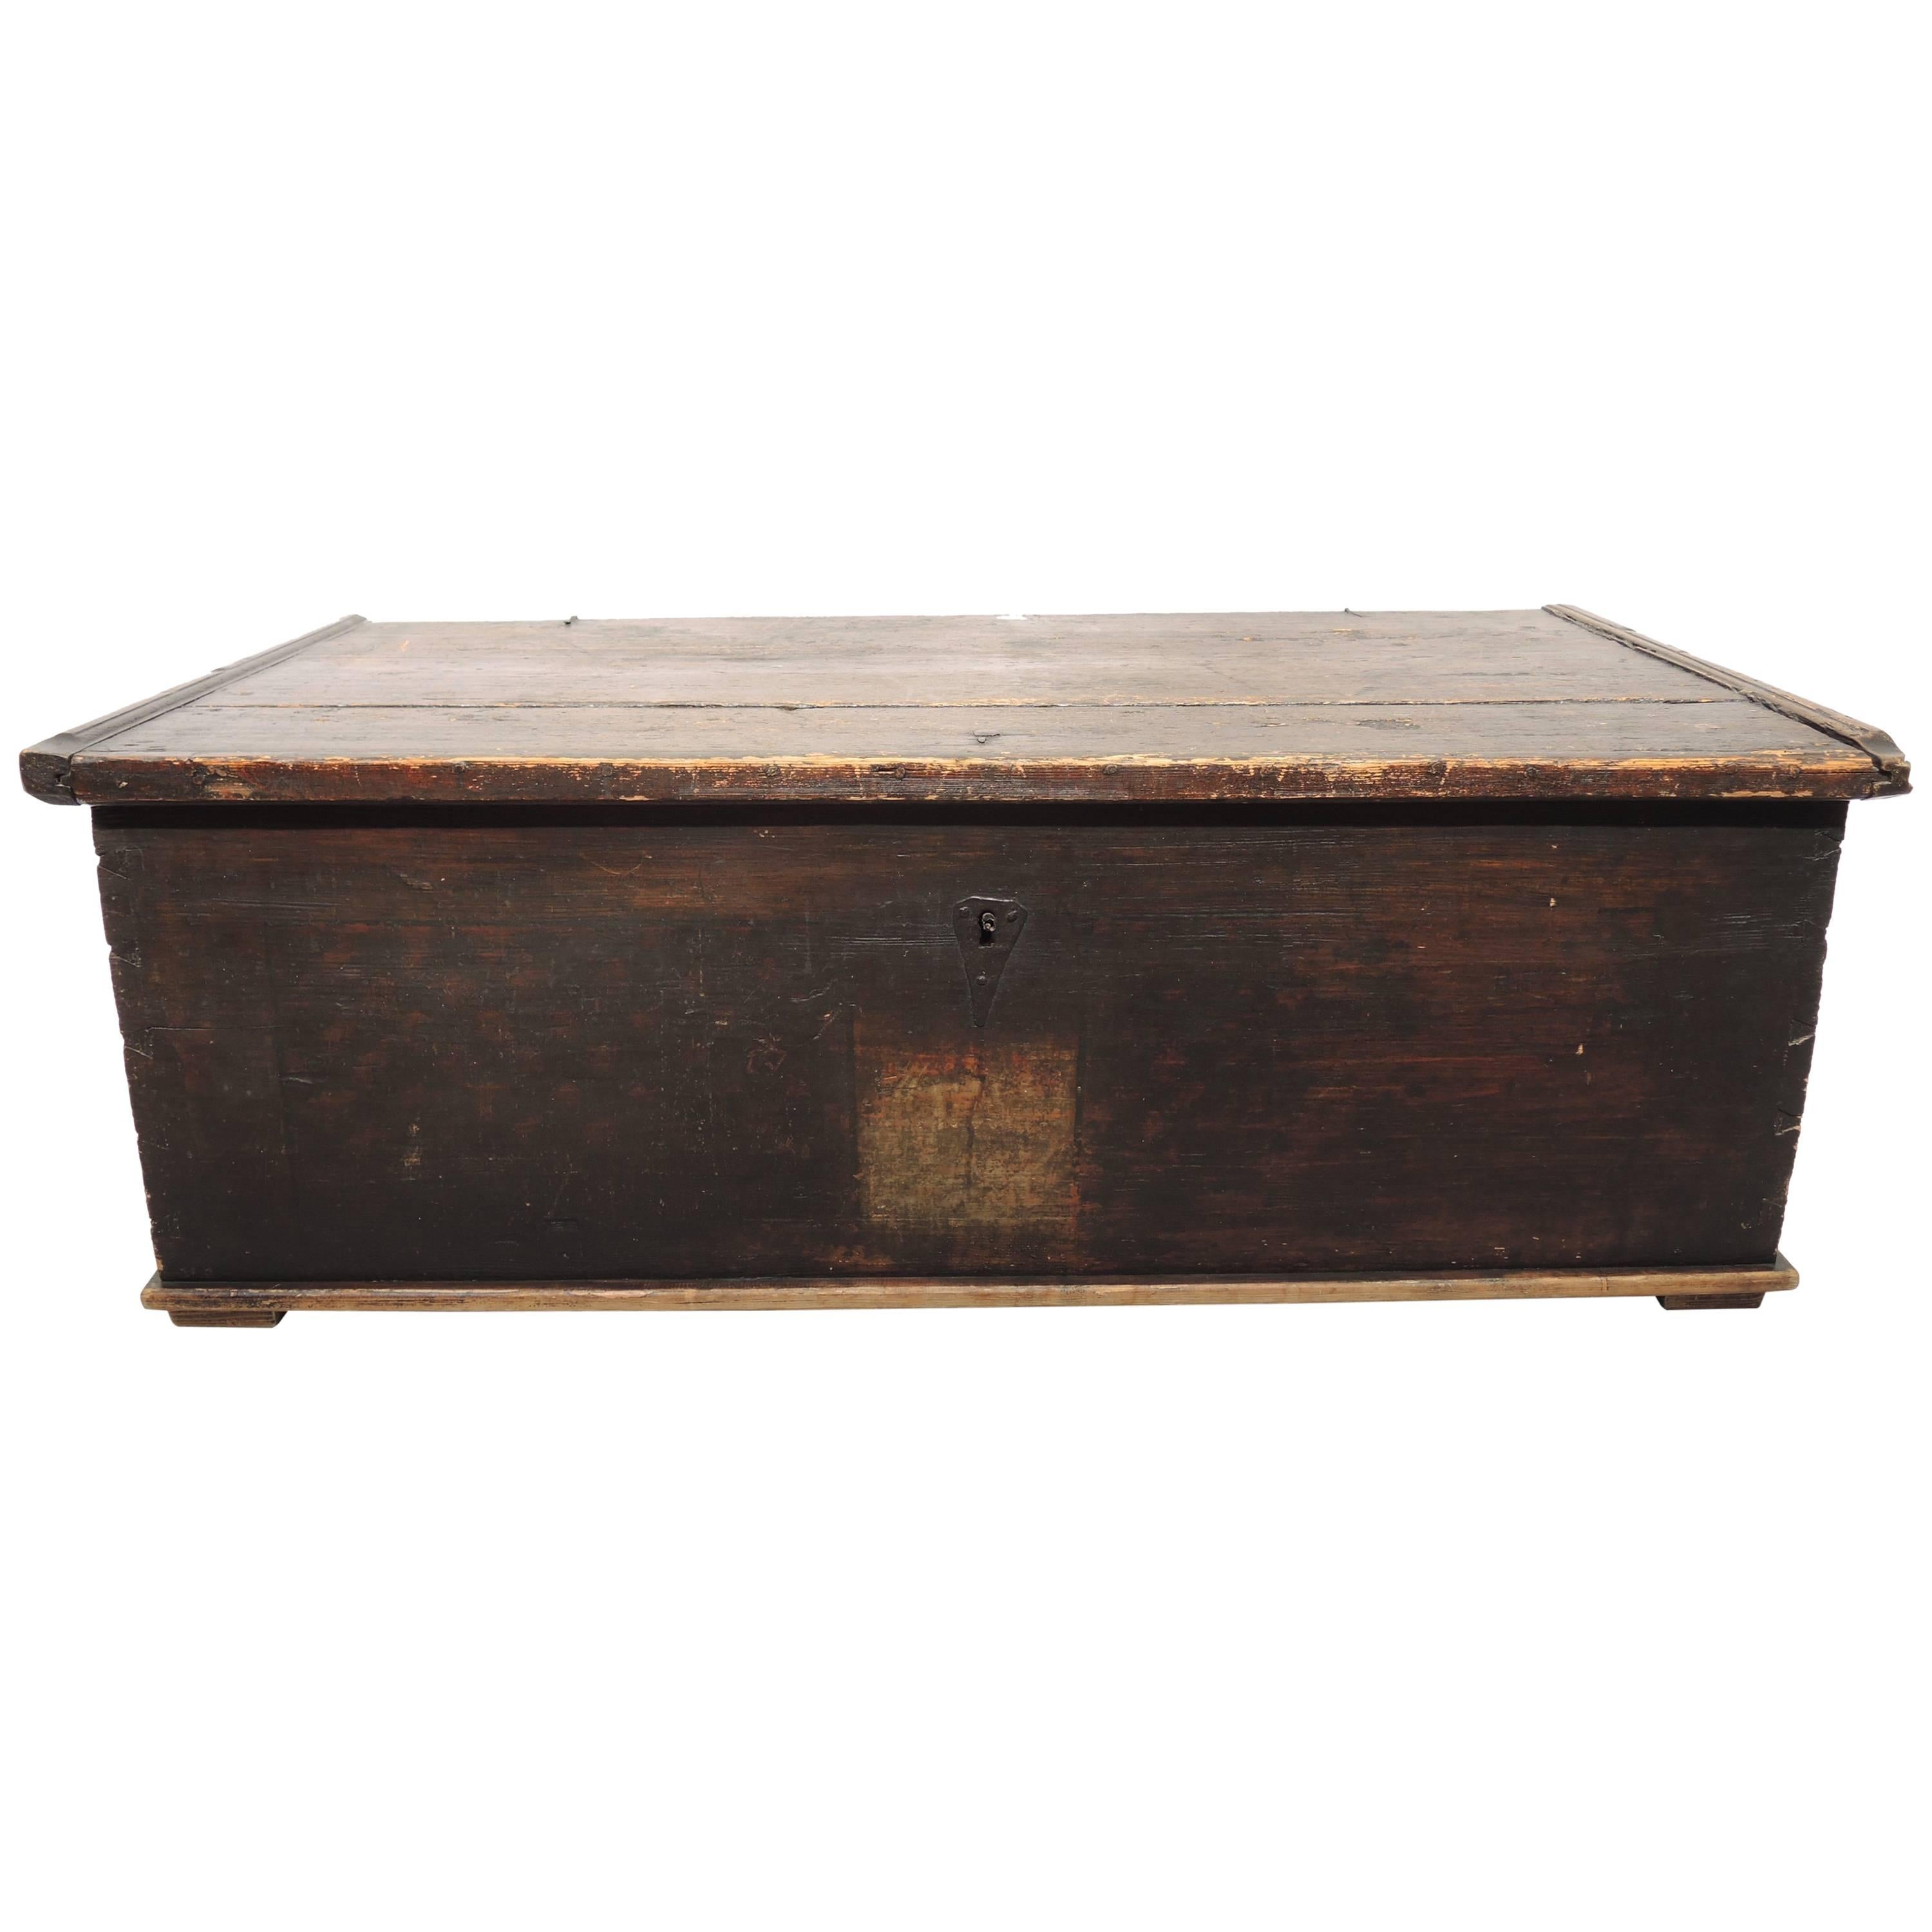 Early 19th Century Swedish Painted Trunk For Sale